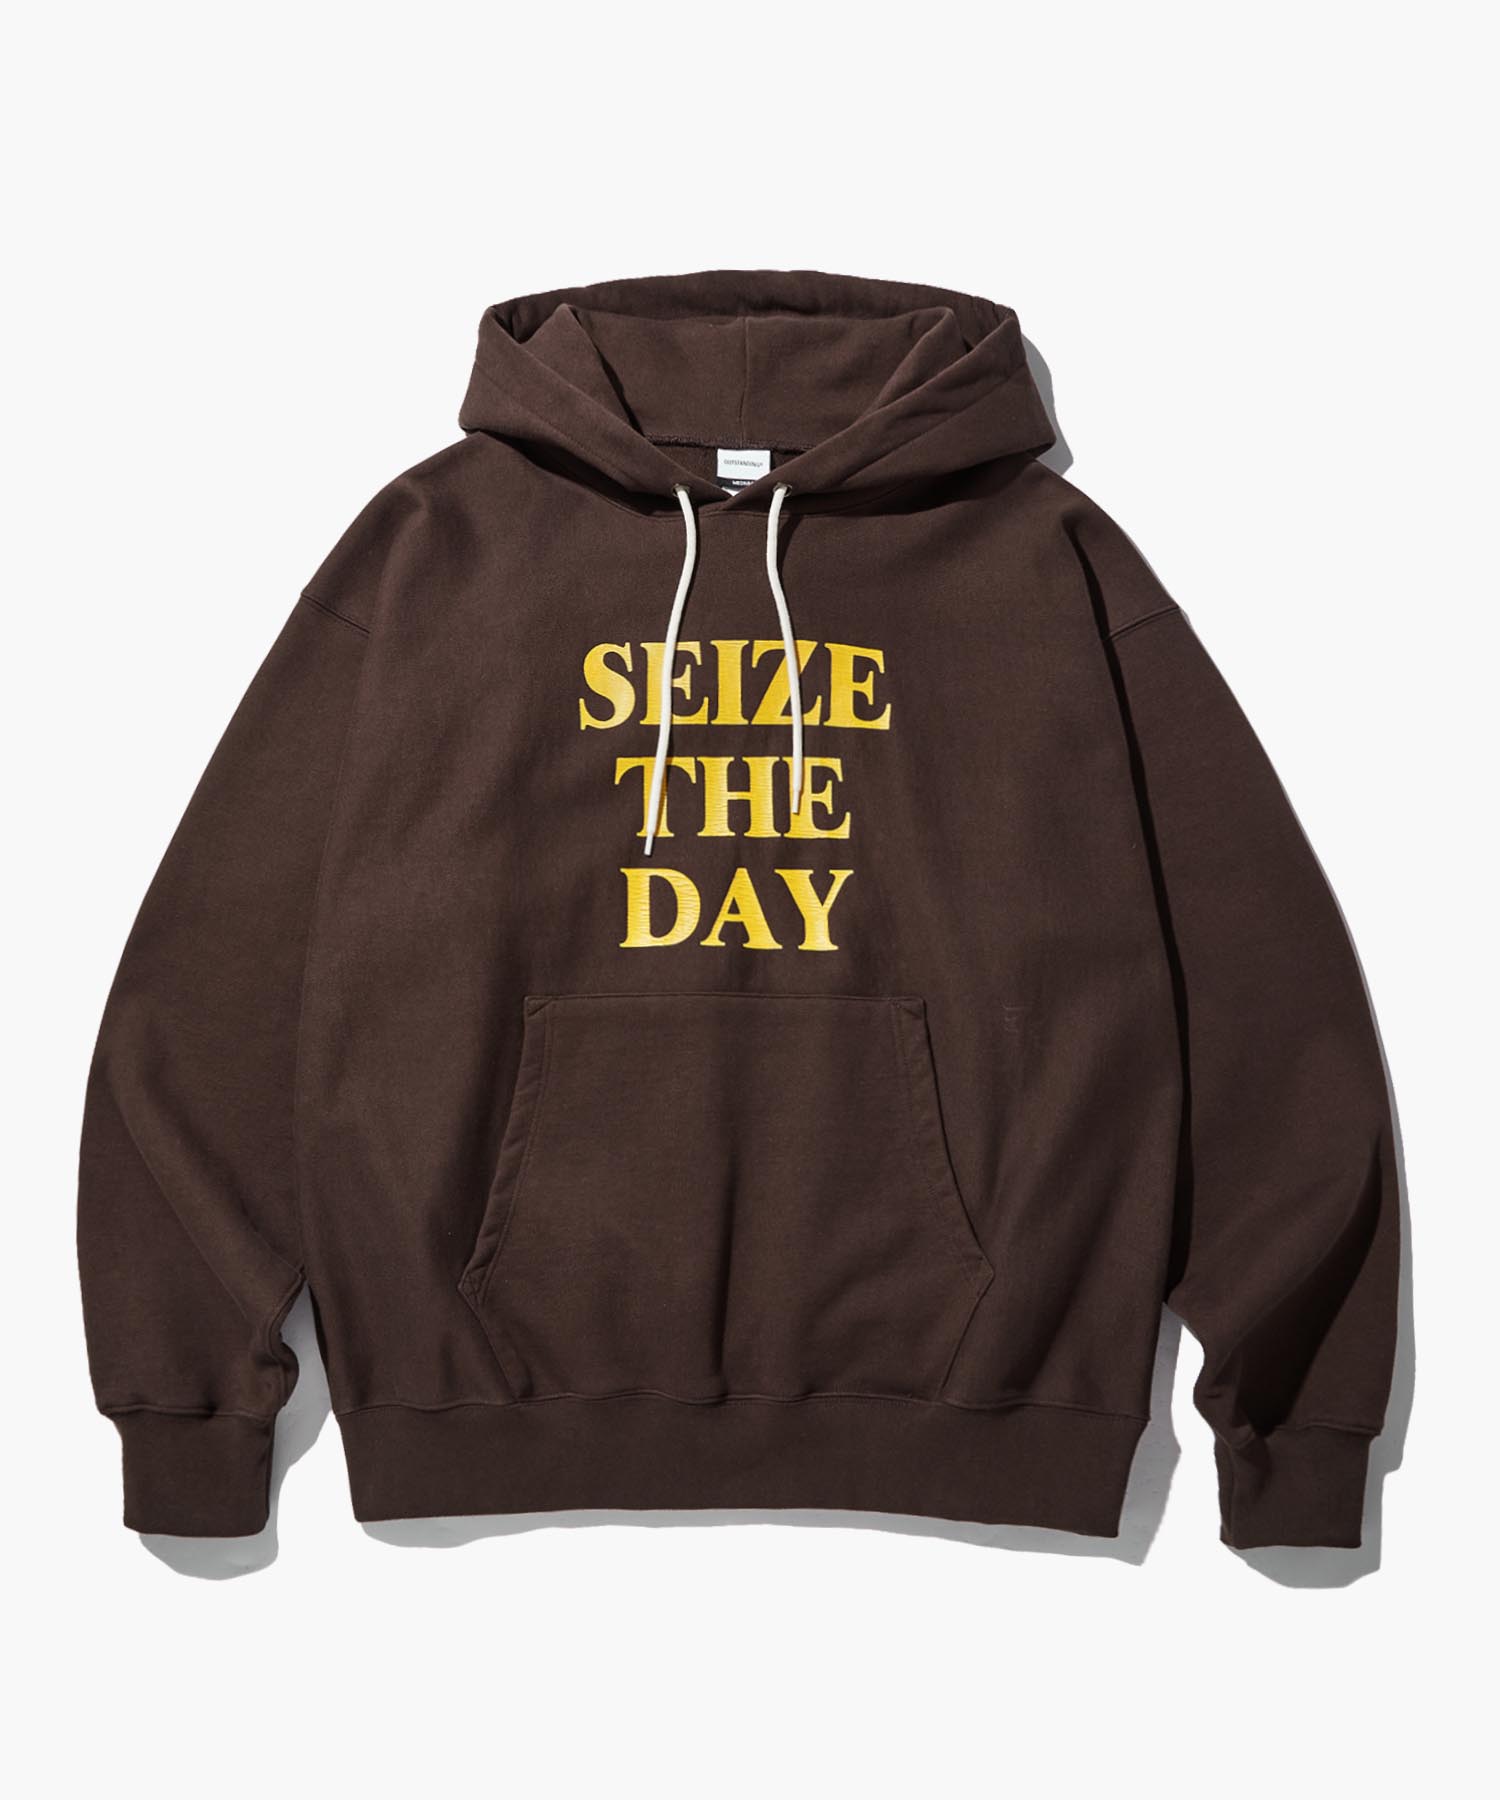 V.S.C HOOD SWEAT(SEIZE THE DAY)_BROWN